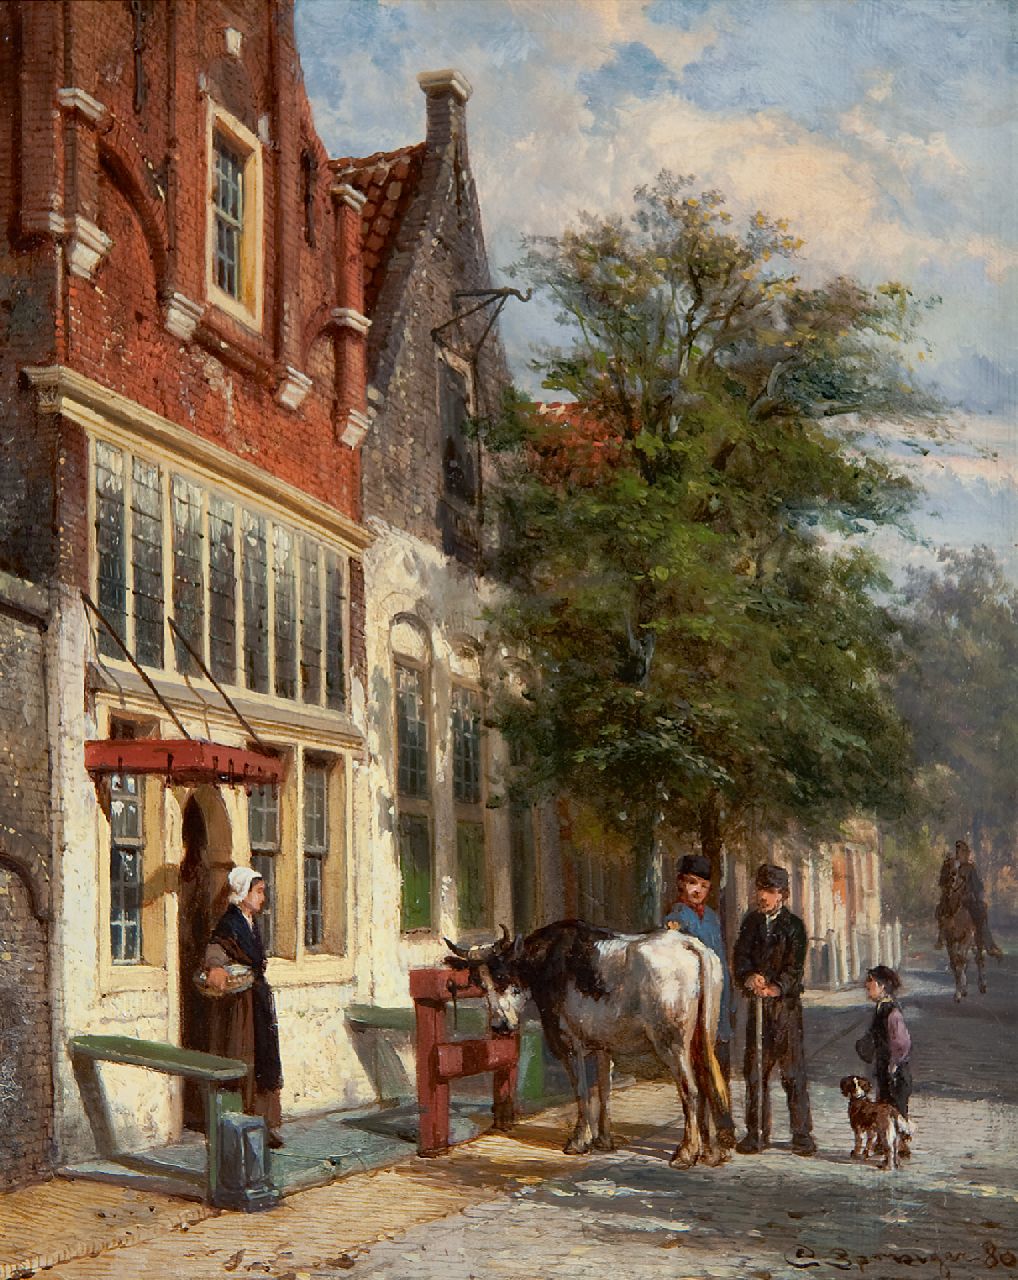 Springer C.  | Cornelis Springer | Paintings offered for sale | Streetscene in Monnickendam, oil on panel 25.1 x 19.8 cm, signed l.r. and dated '80